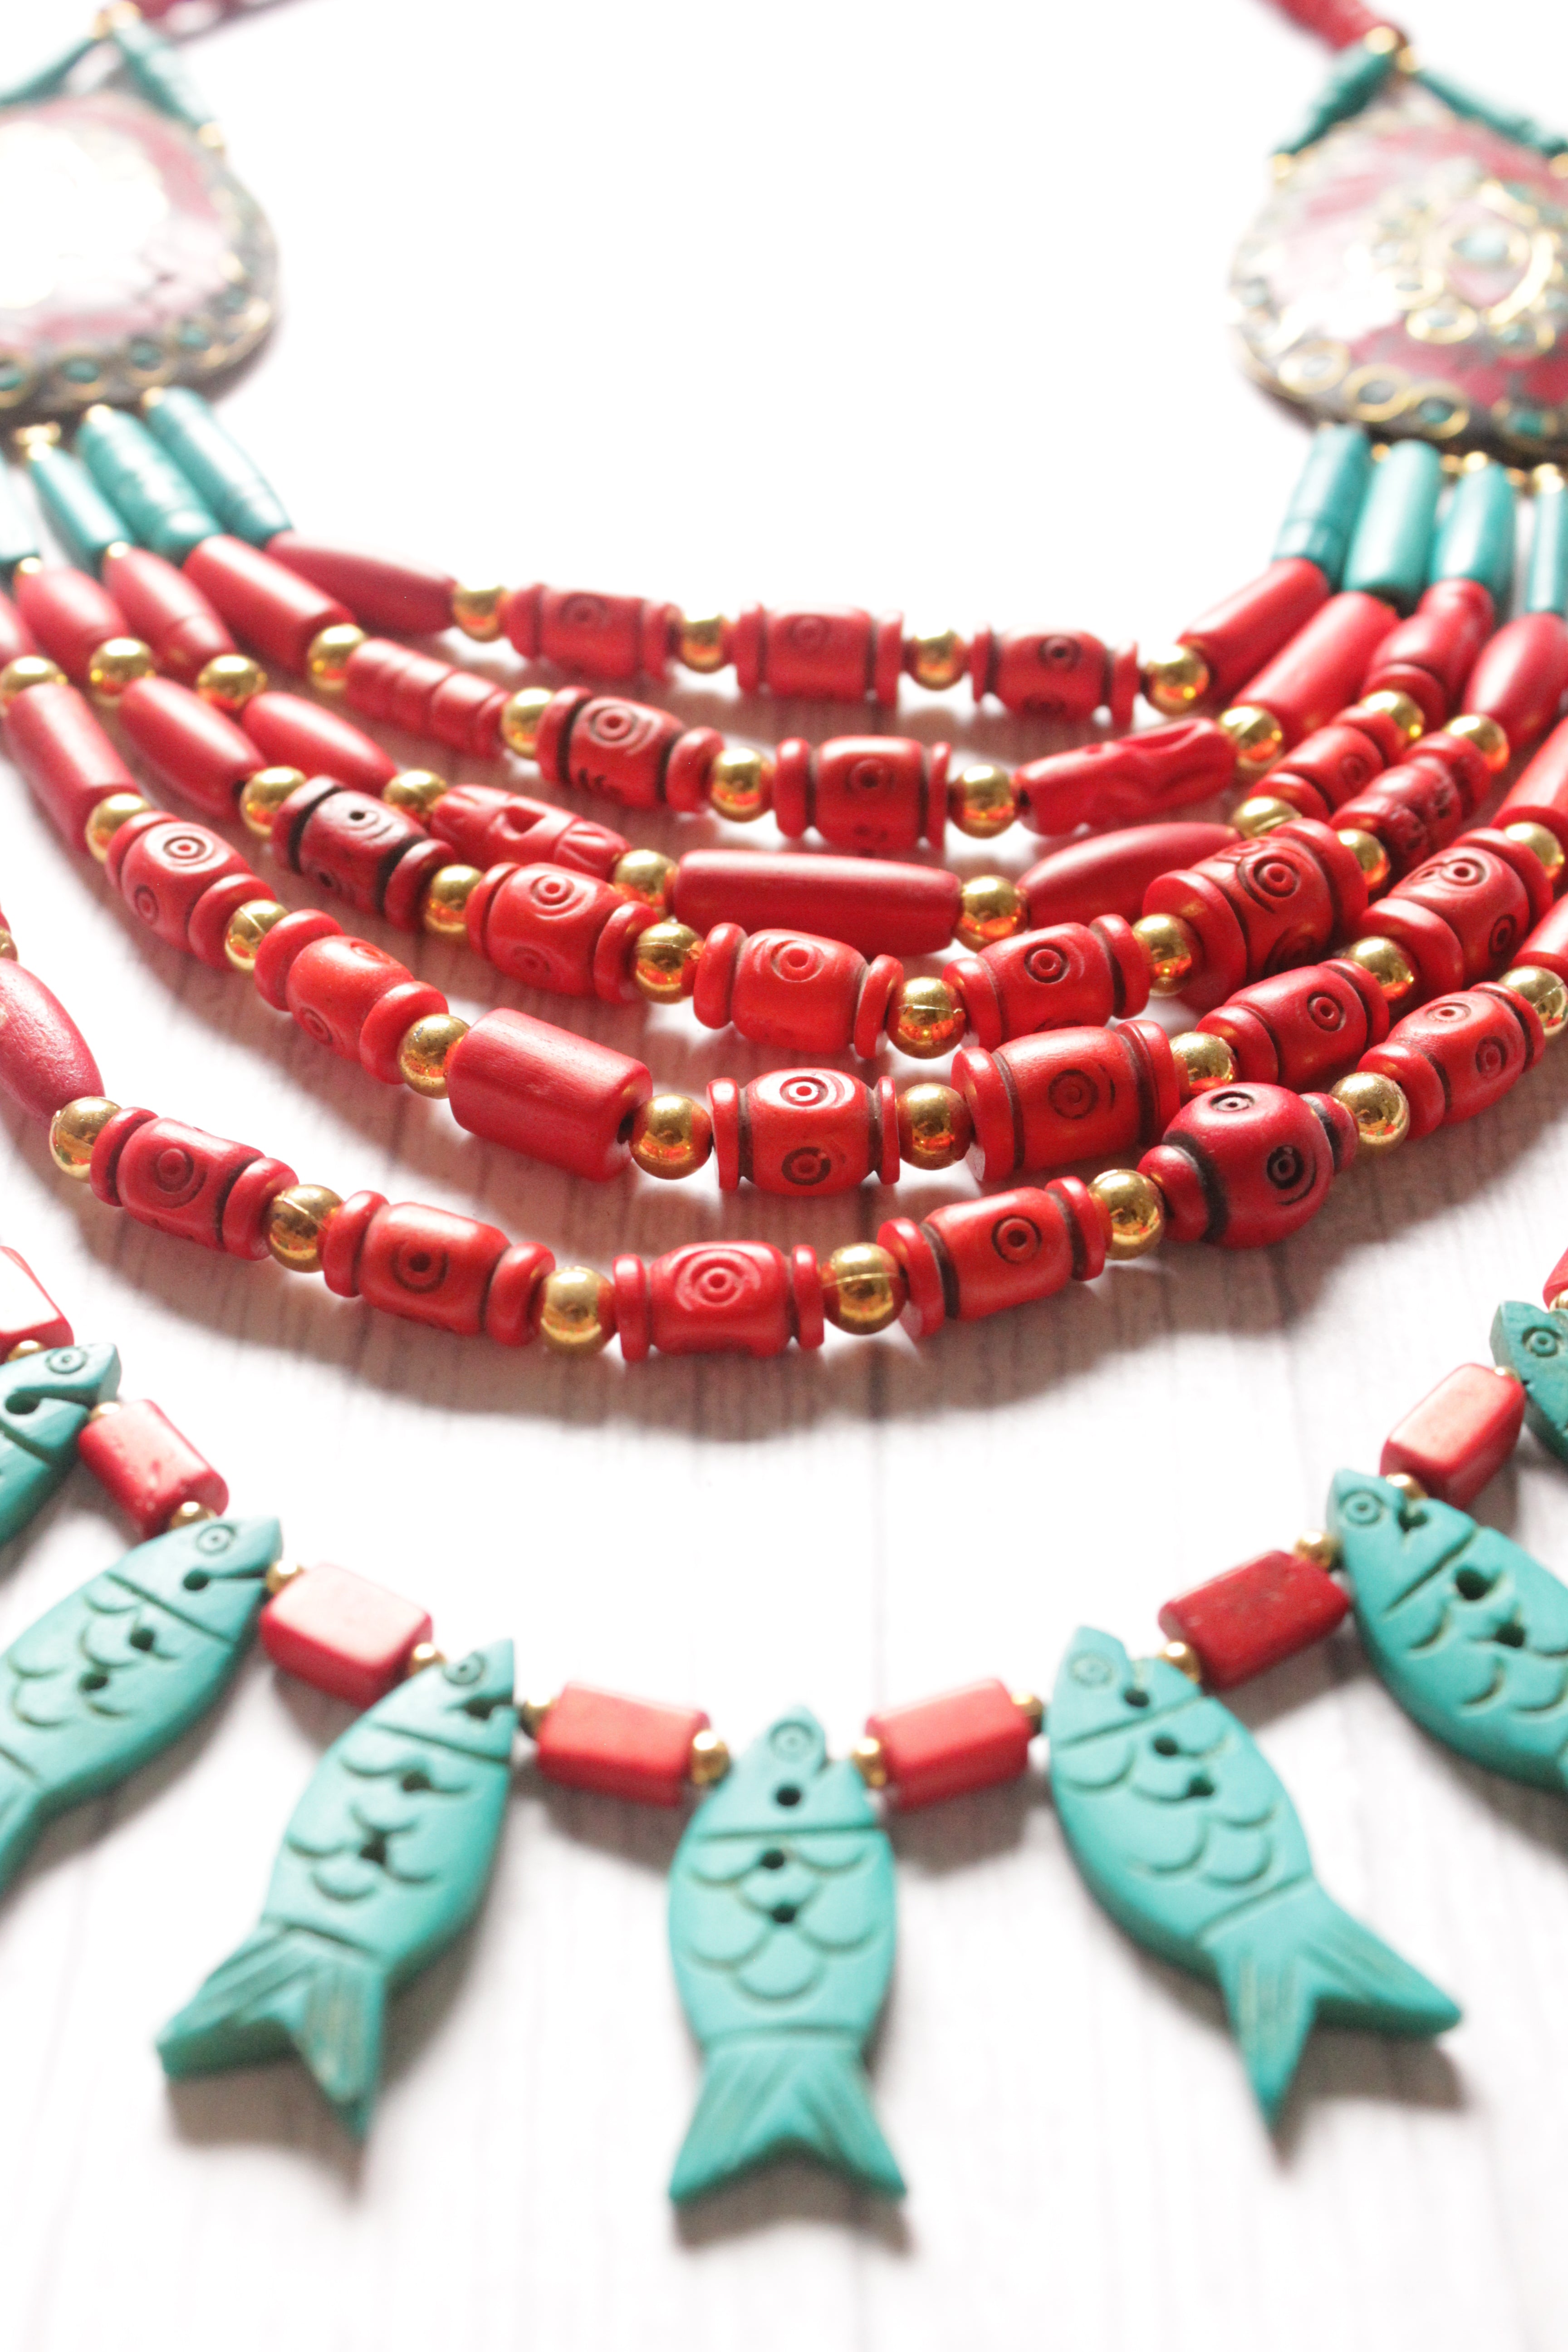 Turquoise & Red Wooden Beads Tribal Motifs Handcrafted Statement African Tribal Necklace